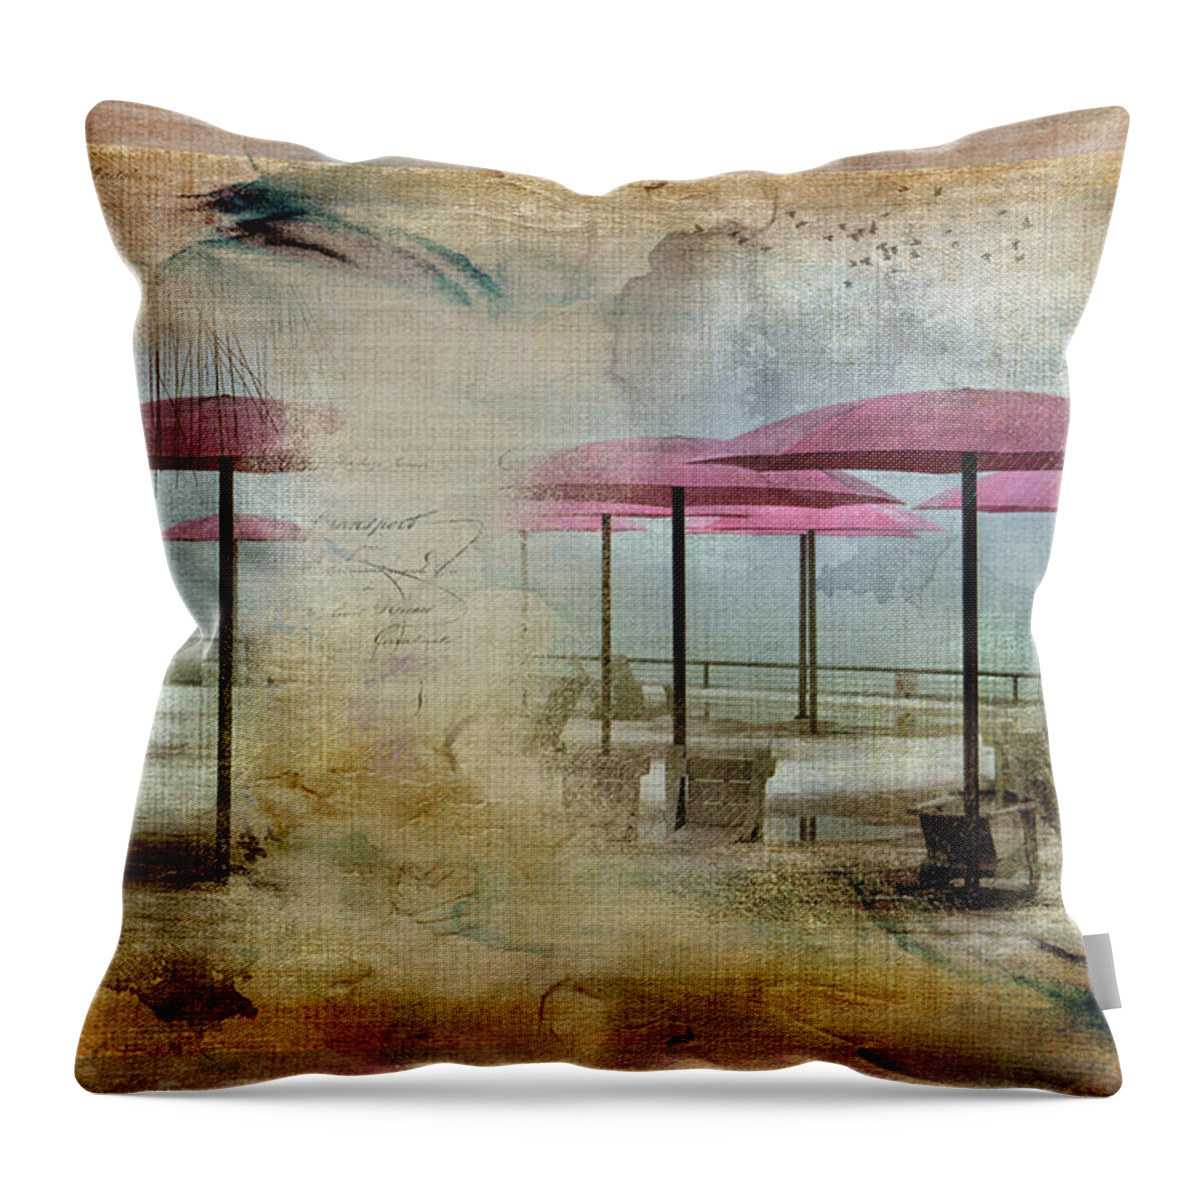 Toronto Throw Pillow featuring the digital art Pink Parasols on Sugar Beach by Nicky Jameson